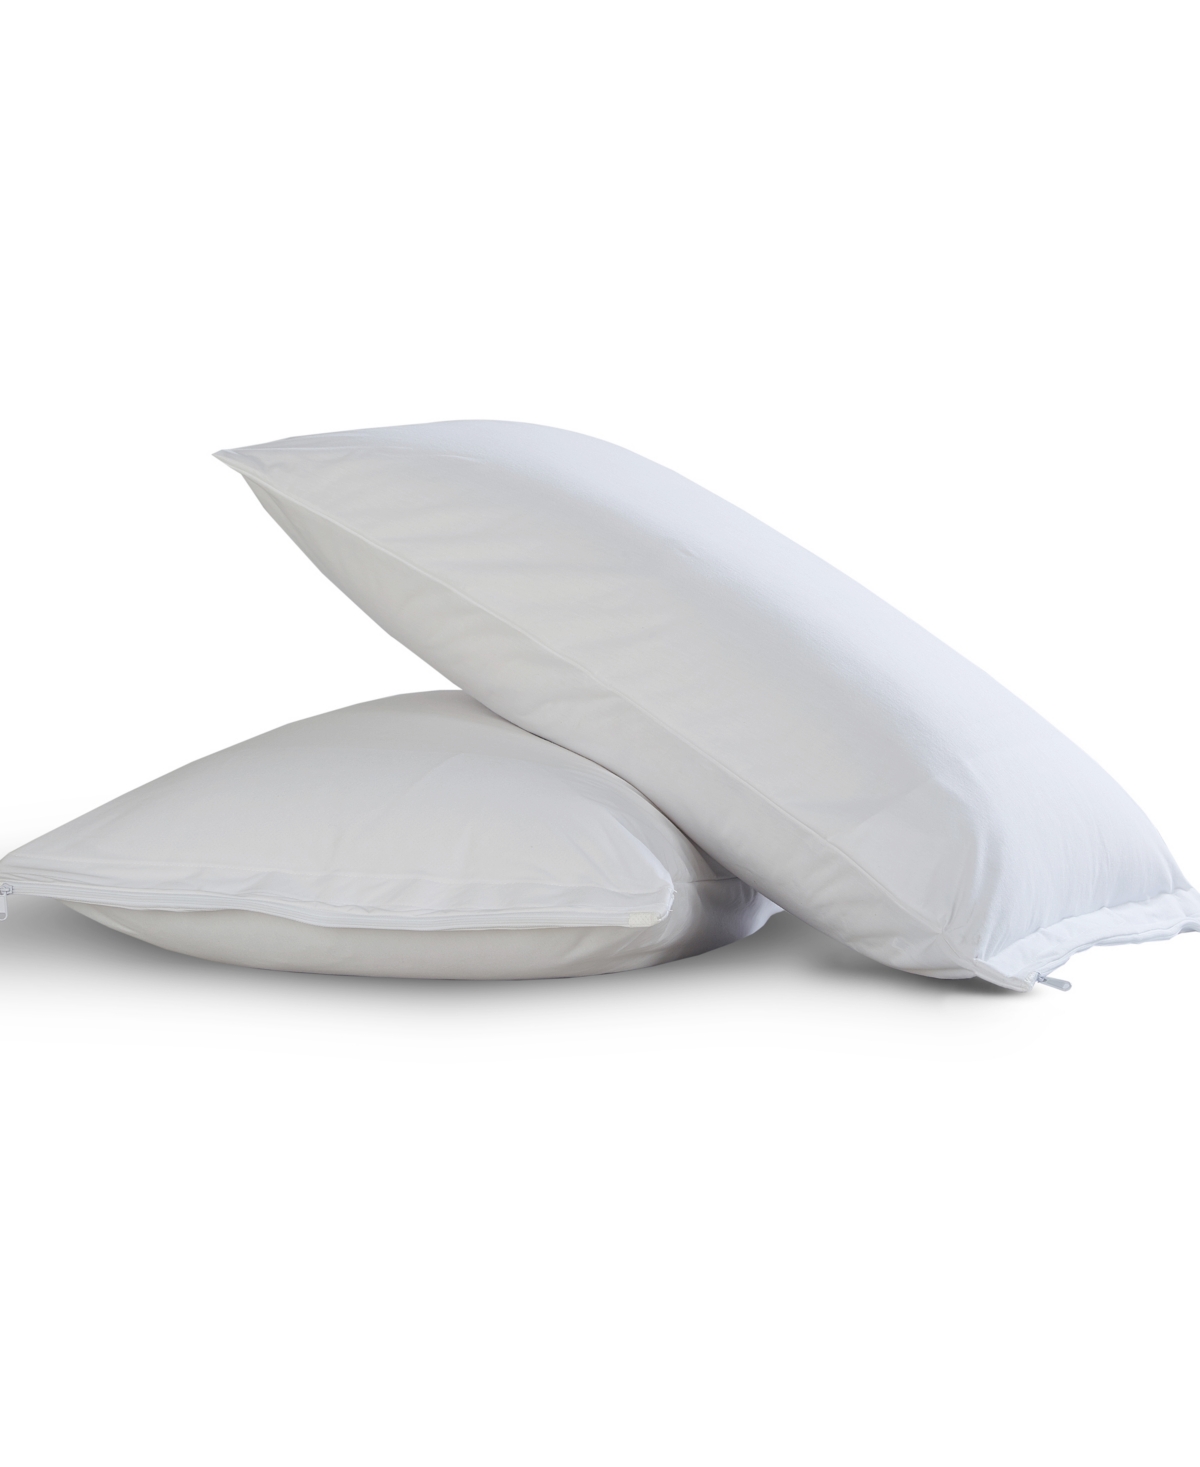 All-In-One Cool King Pillow Protectors with Bed Bug Blocker 2-Pack